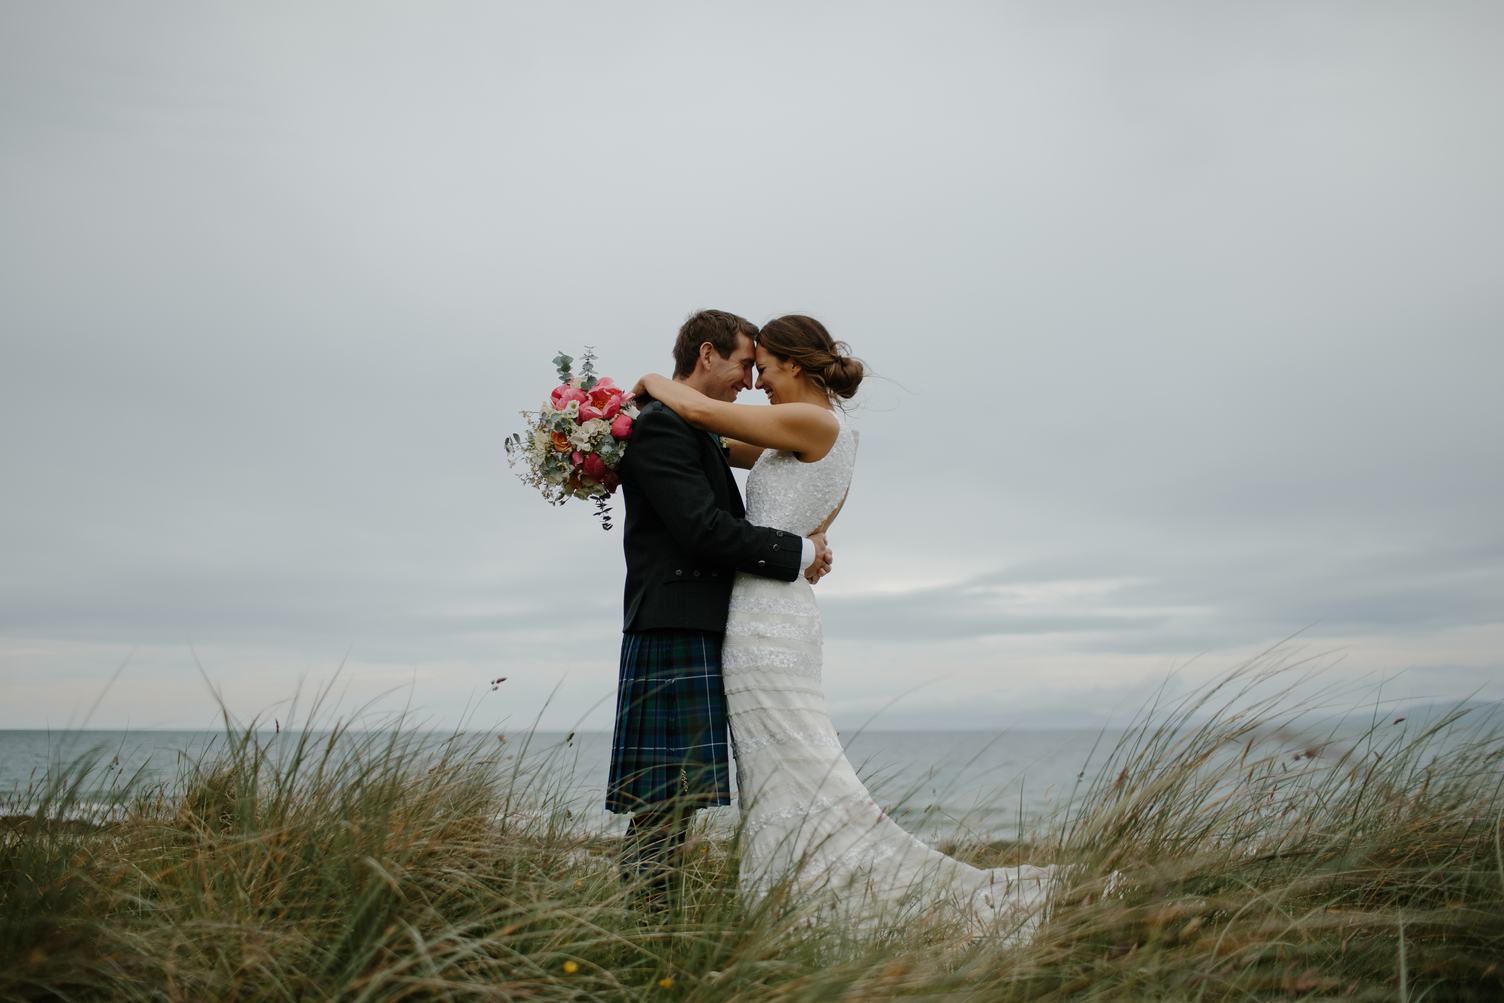 Happy and Lovely Wedding Couple Cuddling on the Beach